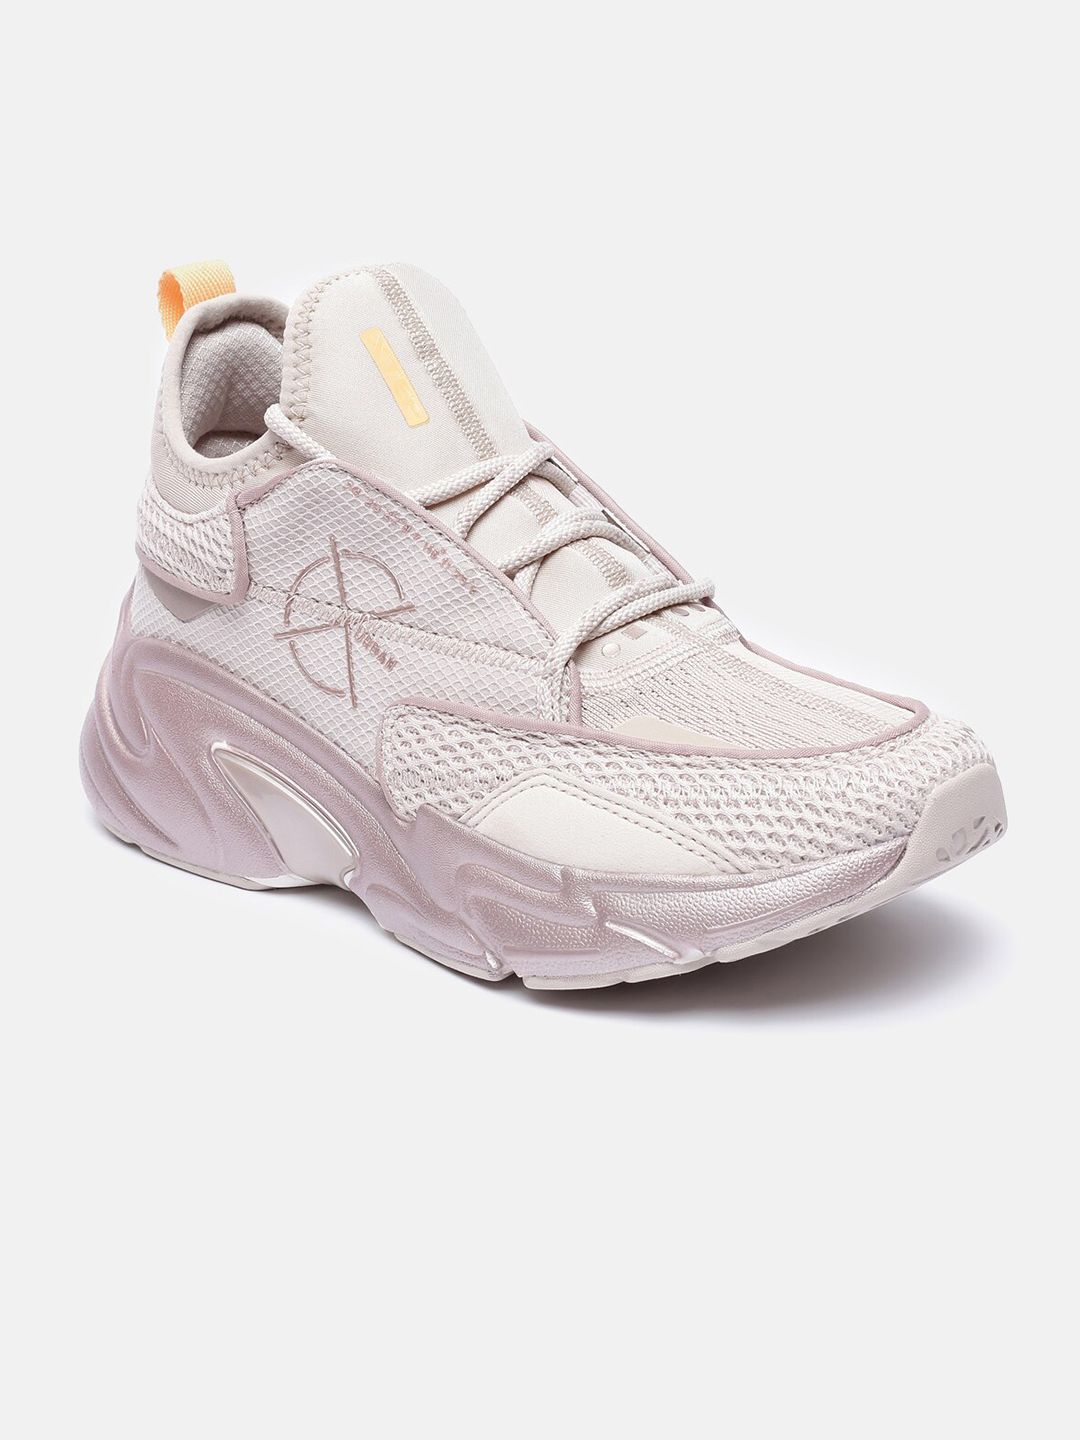 Xtep Women Pink & White Running Shoes Price in India